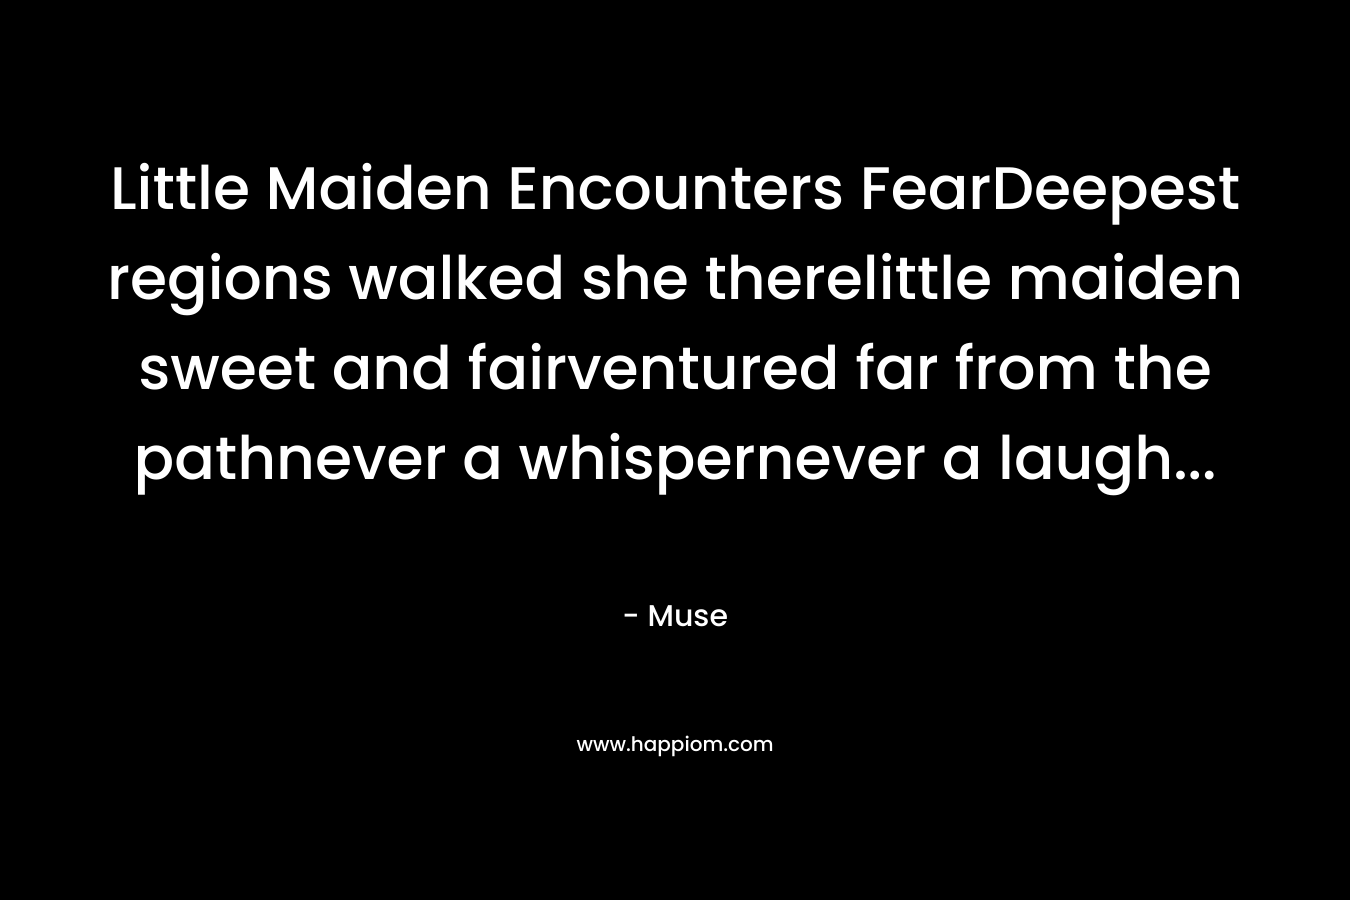 Little Maiden Encounters FearDeepest regions walked she therelittle maiden sweet and fairventured far from the pathnever a whispernever a laugh… – Muse